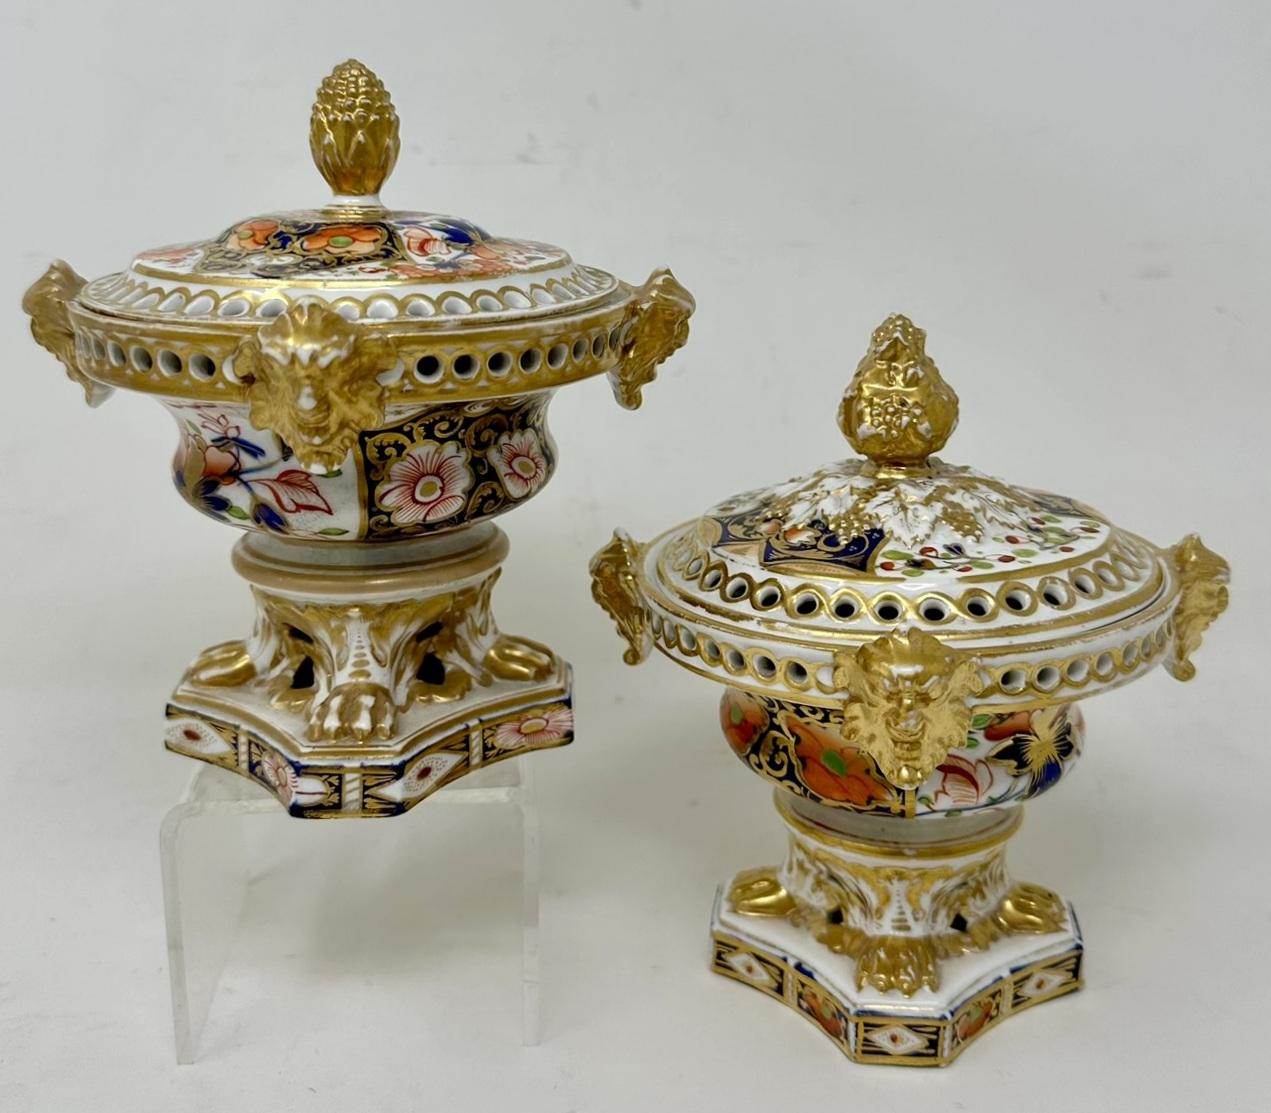 Wonderful Rare Matched Pair of Early English Regency Royal Crown Derby Porcelain Pot Pourri or Pastile Burners of traditional form. First quarter of the Nineteenth Century. 

Lavishly hand decorated in Imari palette with colours of Iron Red and